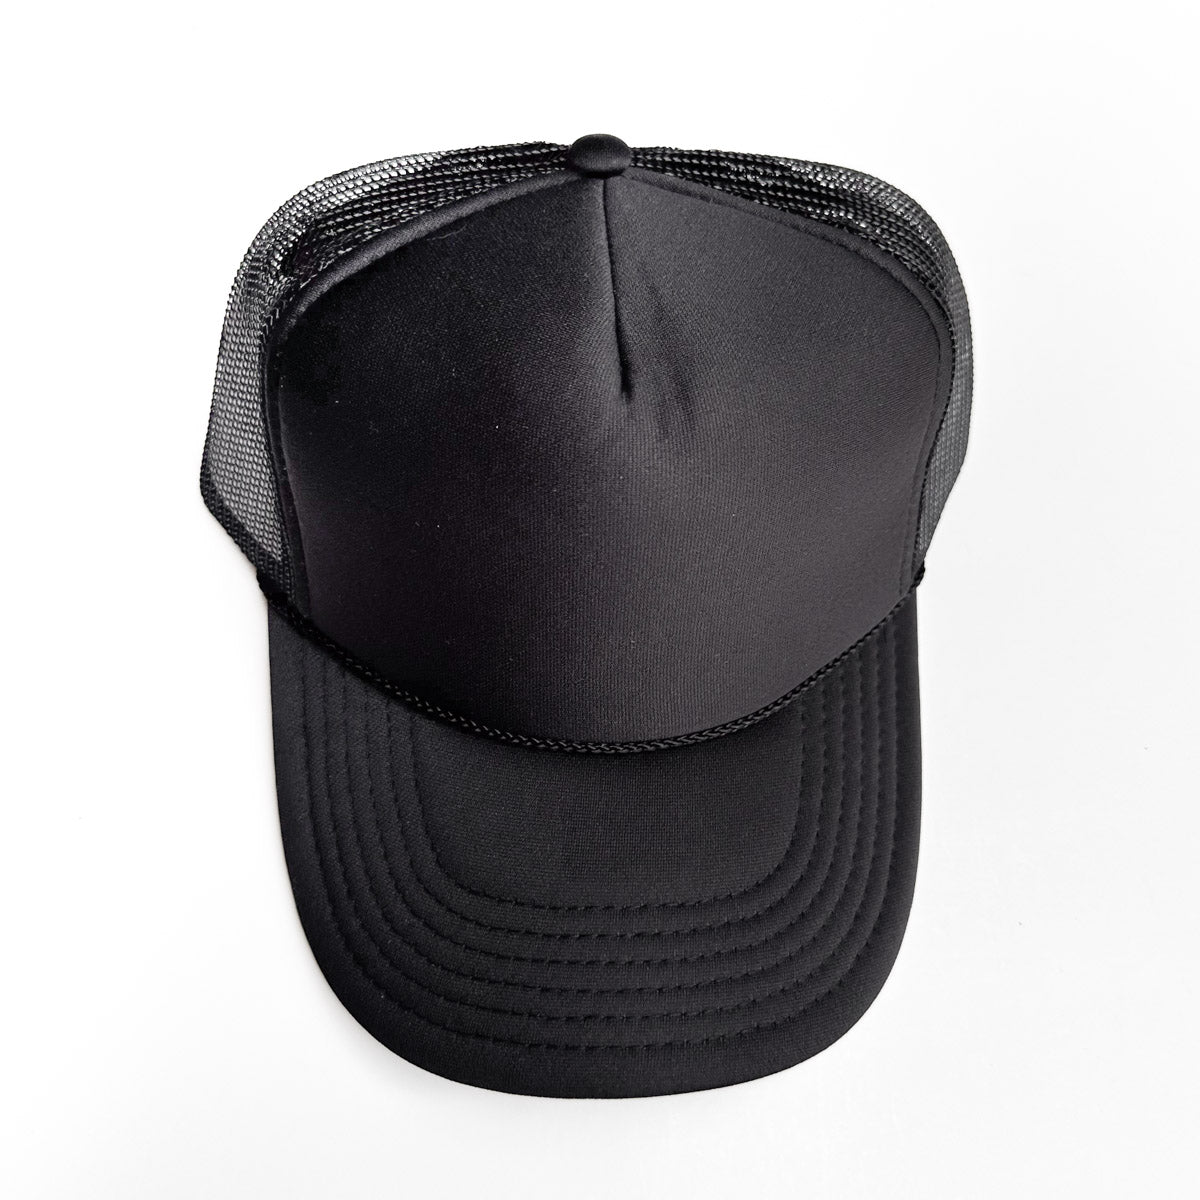 Black cap with mesh back